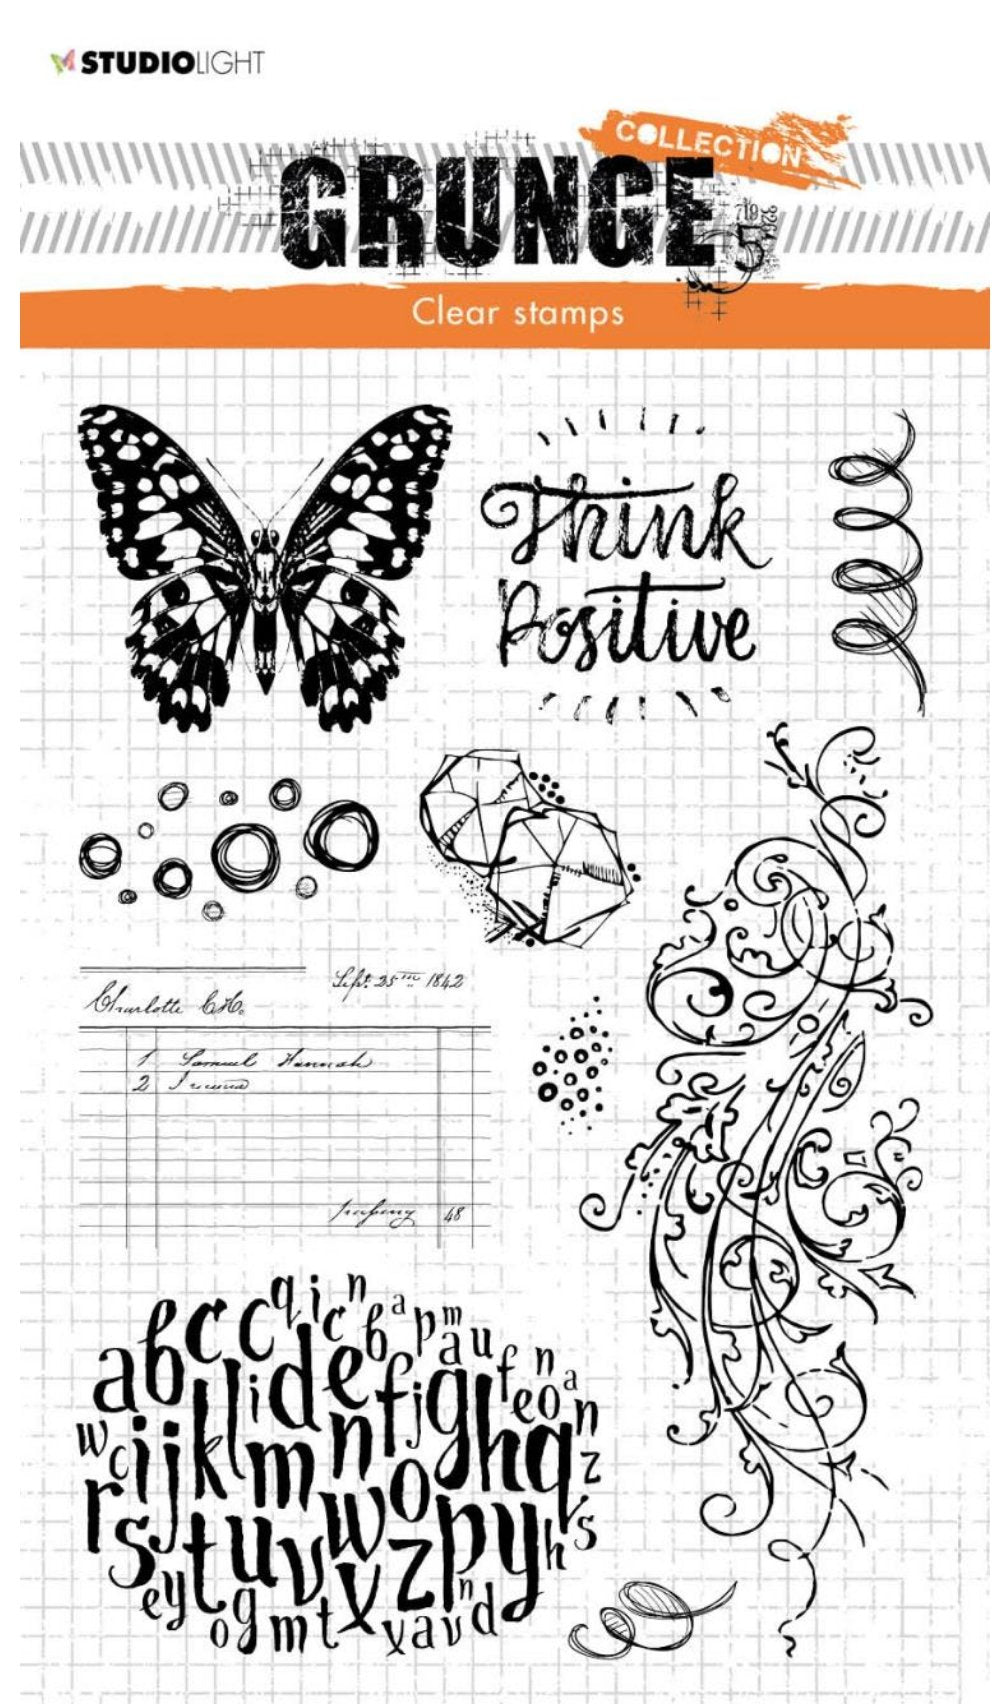 Studio Light - Clear Stamp Elements Butterfly Grunge Collection 210x148x3mm 10 PC Nr.207 Studio Light